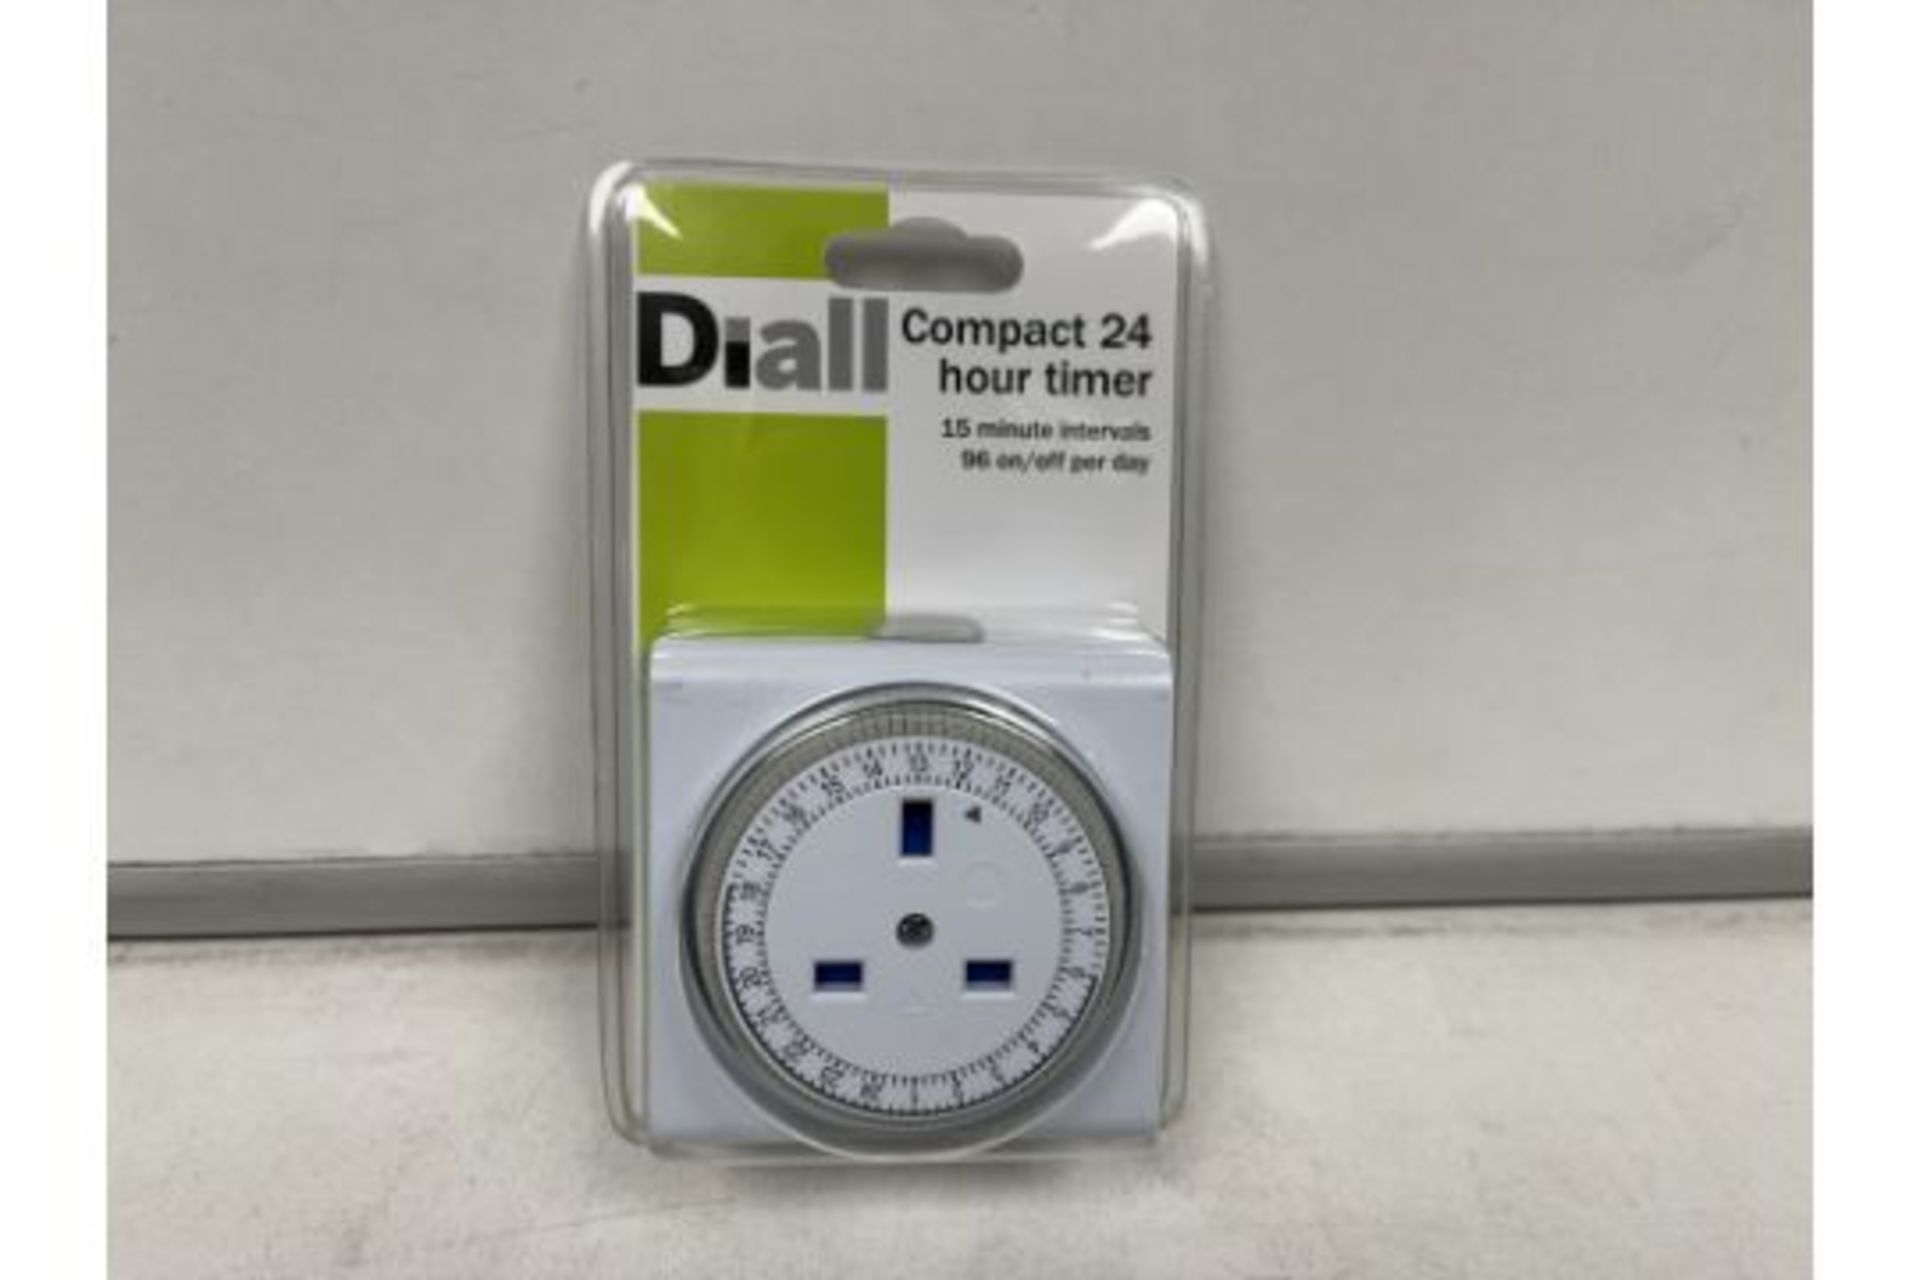 8 X NEW PACKAGED DIALL COMPACT 24 HOUR TIMERS. 15 MINUTE INTERVALS. 90 ON/OFF PER DAY. (ROW9.3)